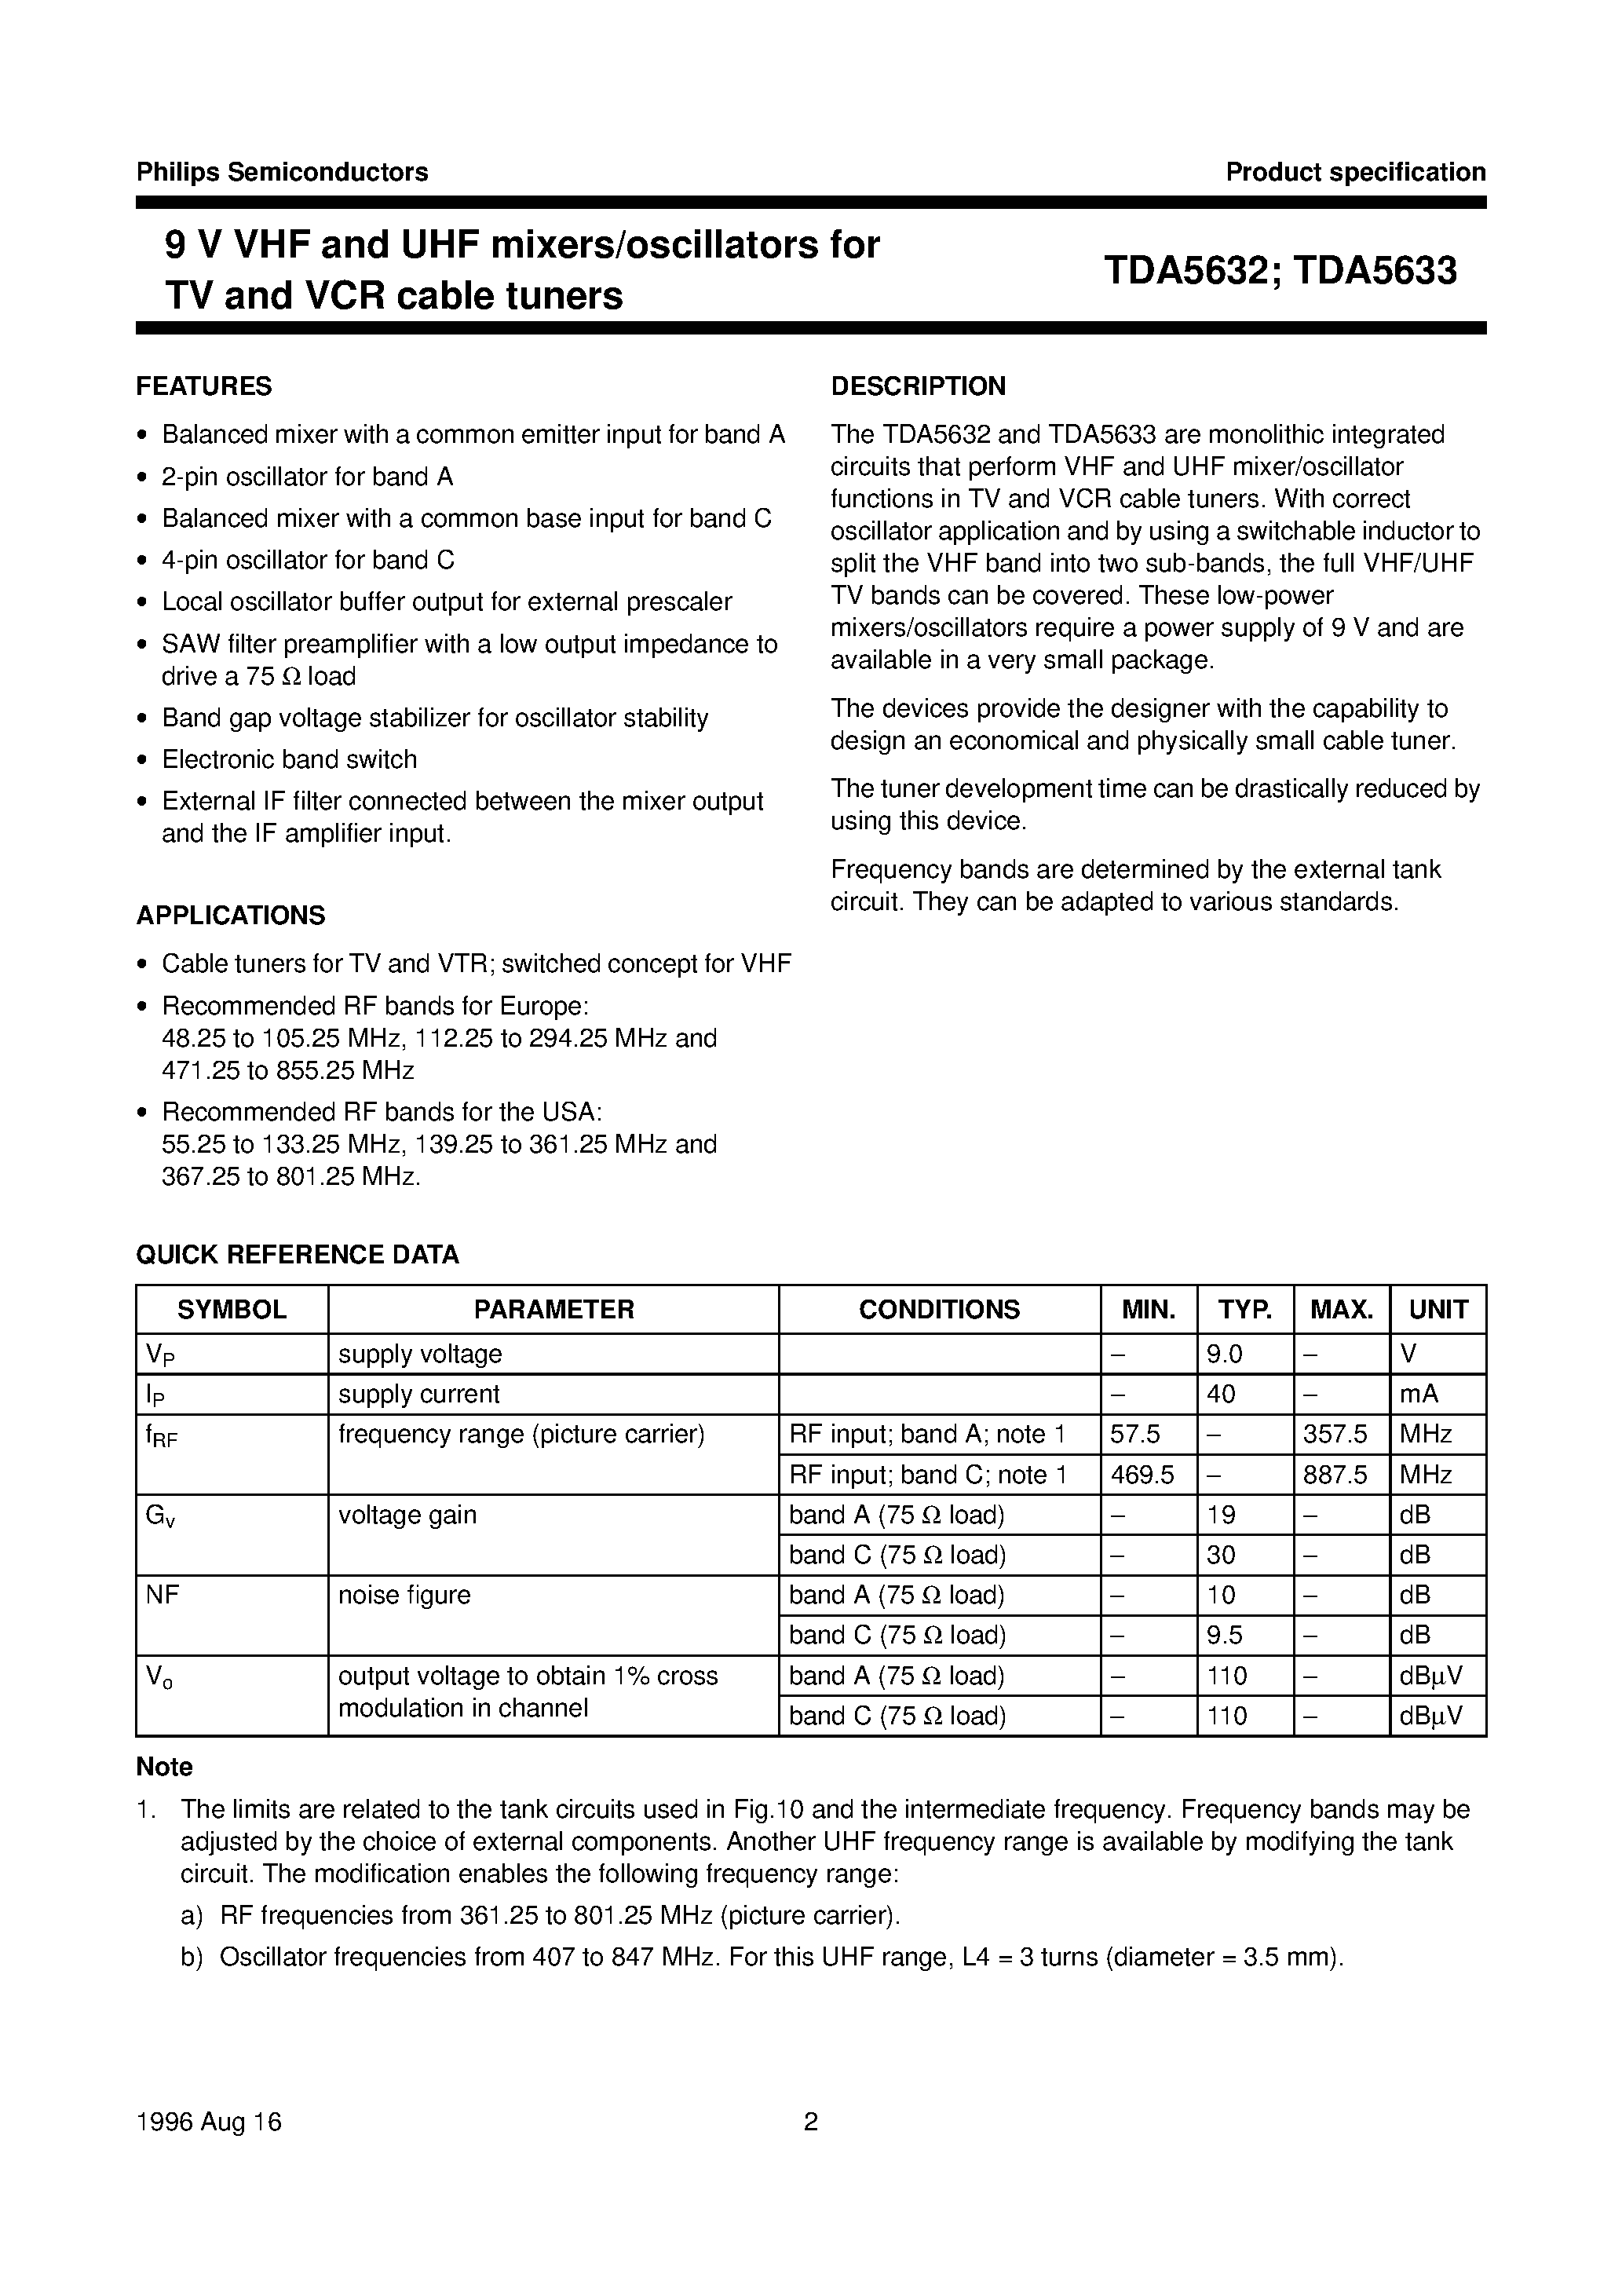 Datasheet TDA5633T - 9 V VHF and UHF mixers/oscillators for TV and VCR cable tuners page 2